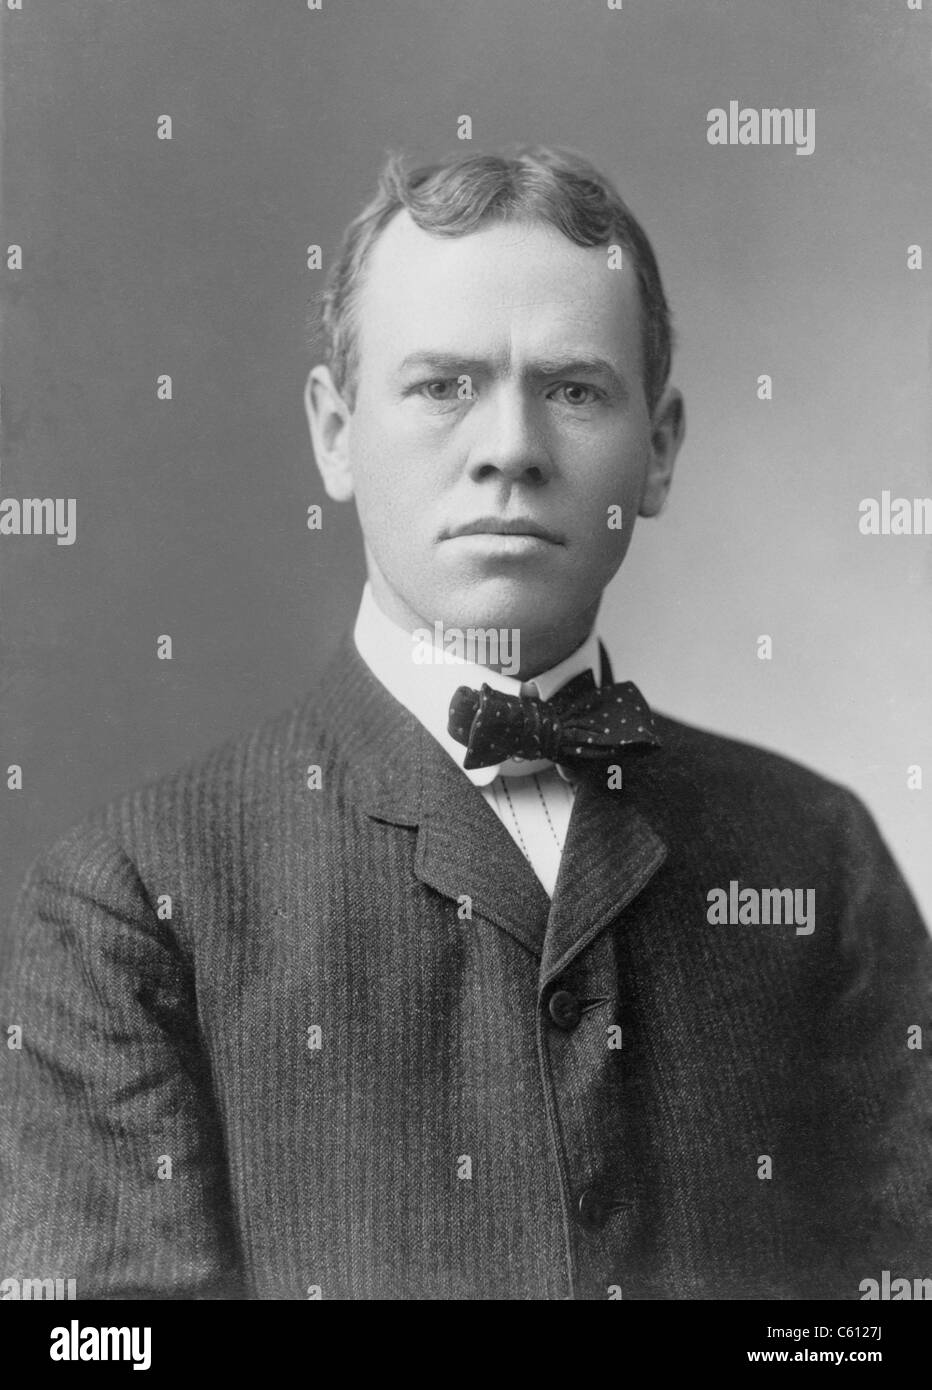 James Brendan Connolly, (1868-1957), athlete and writer, was the first athlete to win a medal at the 1896 Olympics for the triple jump. He became a popular and prolific writer of sea-related shorts stories and novels. Photo by Purdy, 1906. Stock Photo